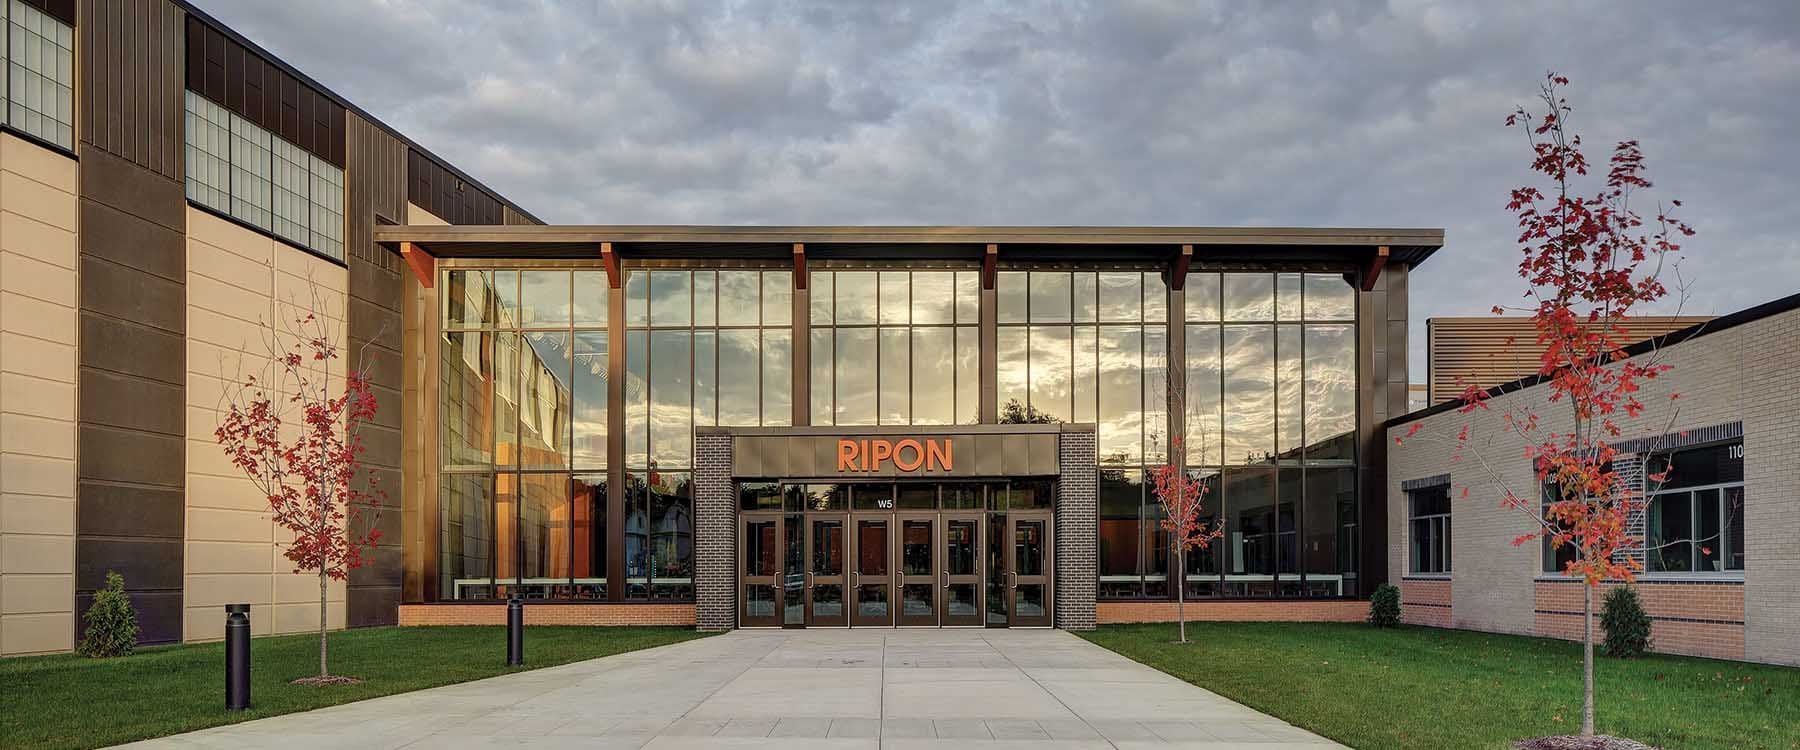 New Entrance at the Ripon Middle High School District, Ripon Wisconsin